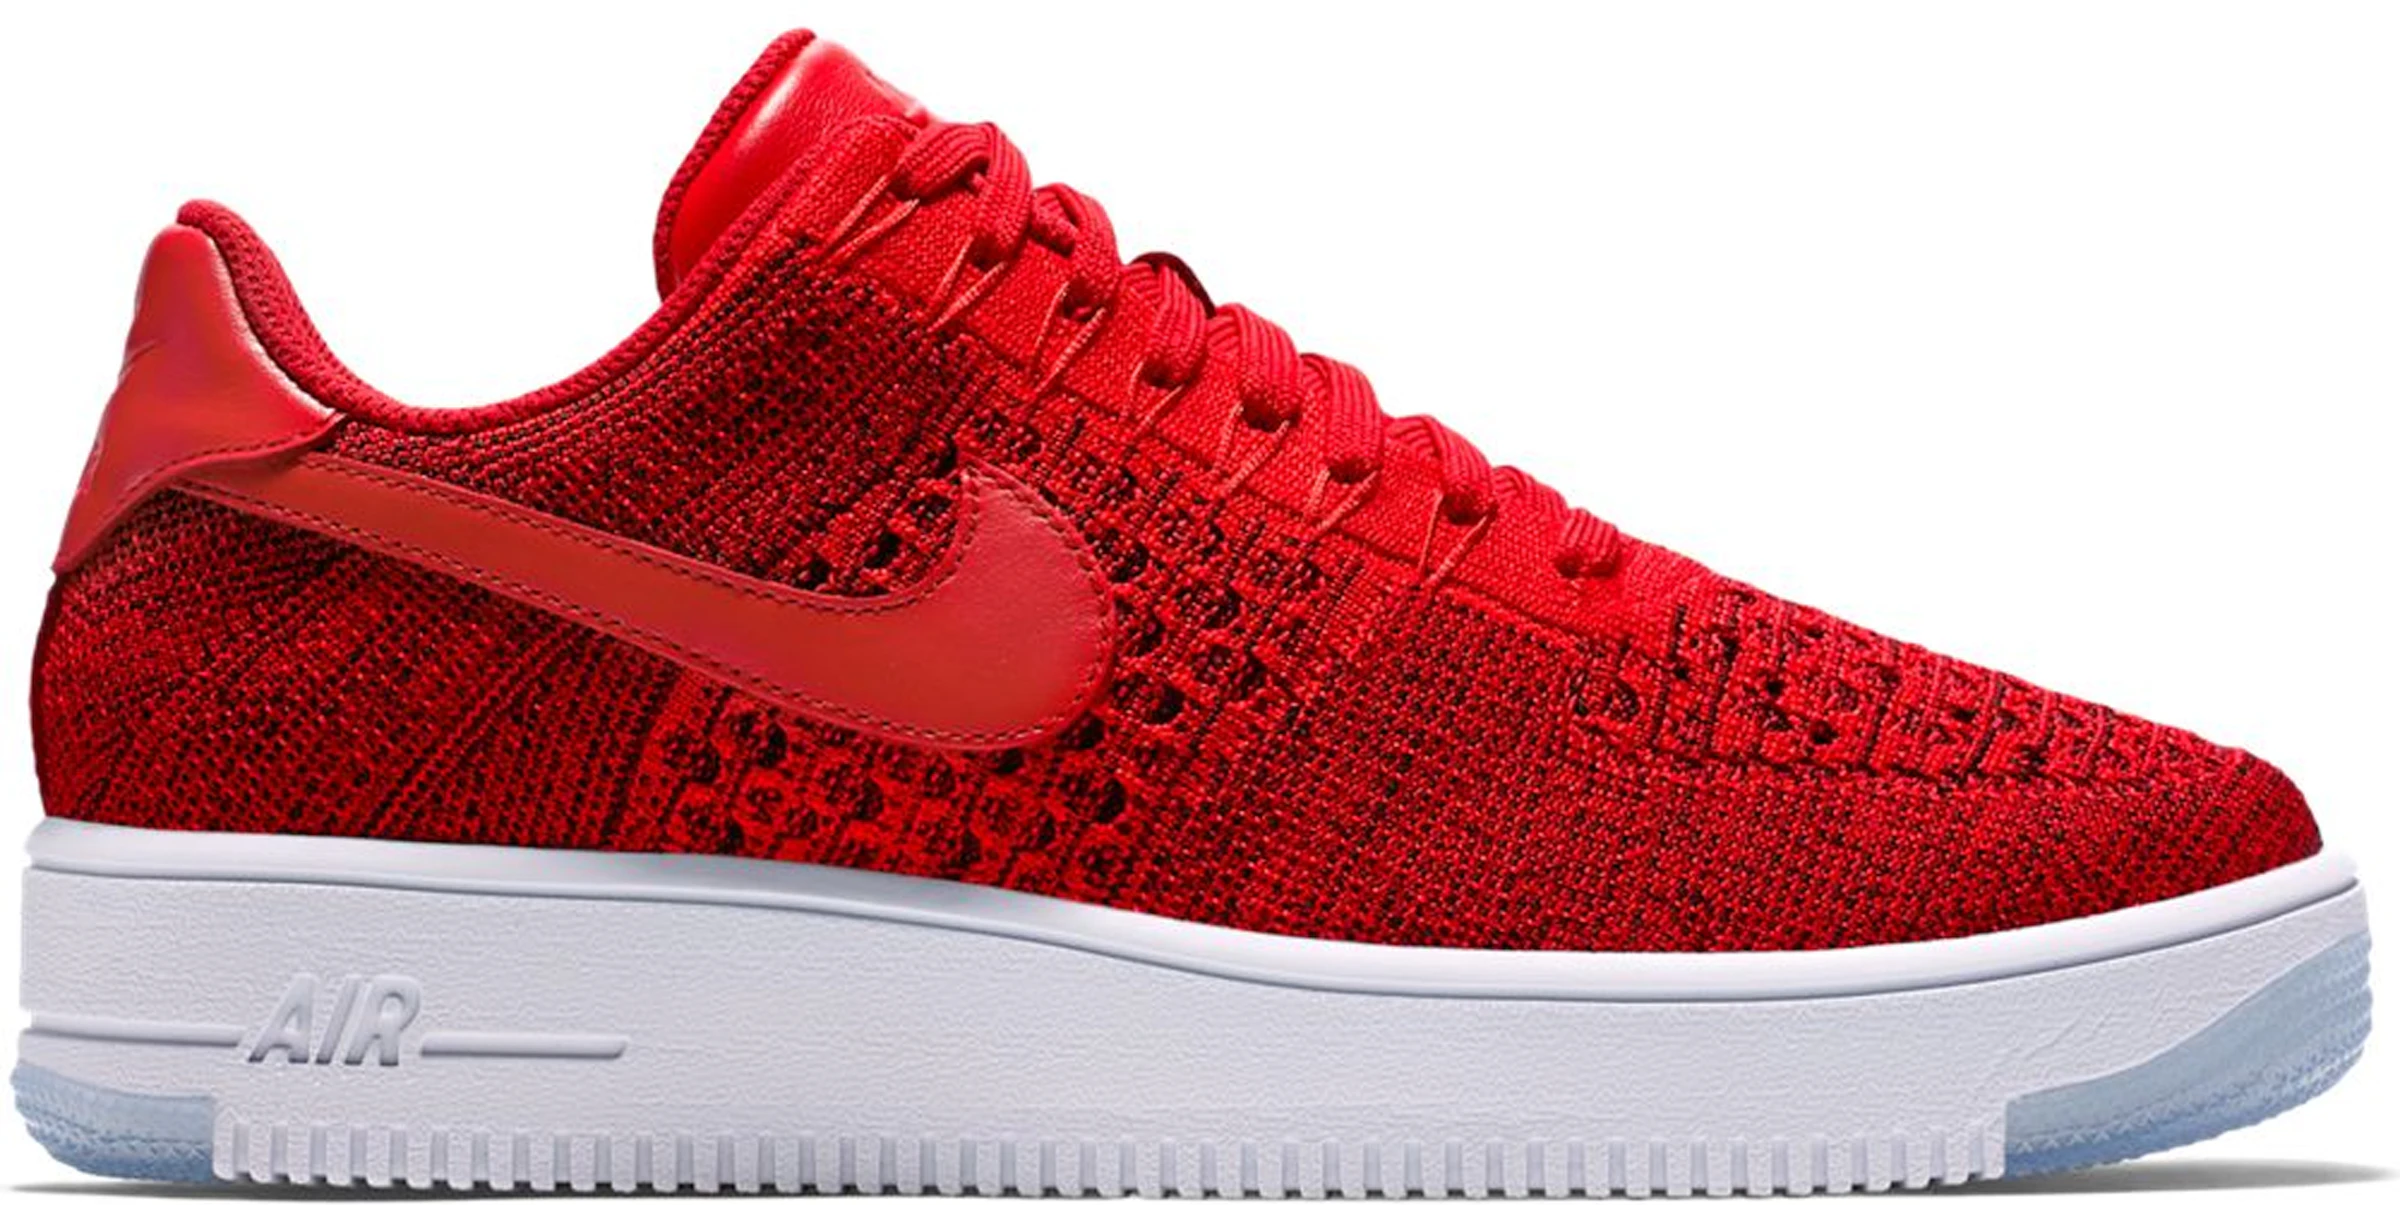 Nike Air Force 1 Ultra Flyknit Low Red - 817419-600 -